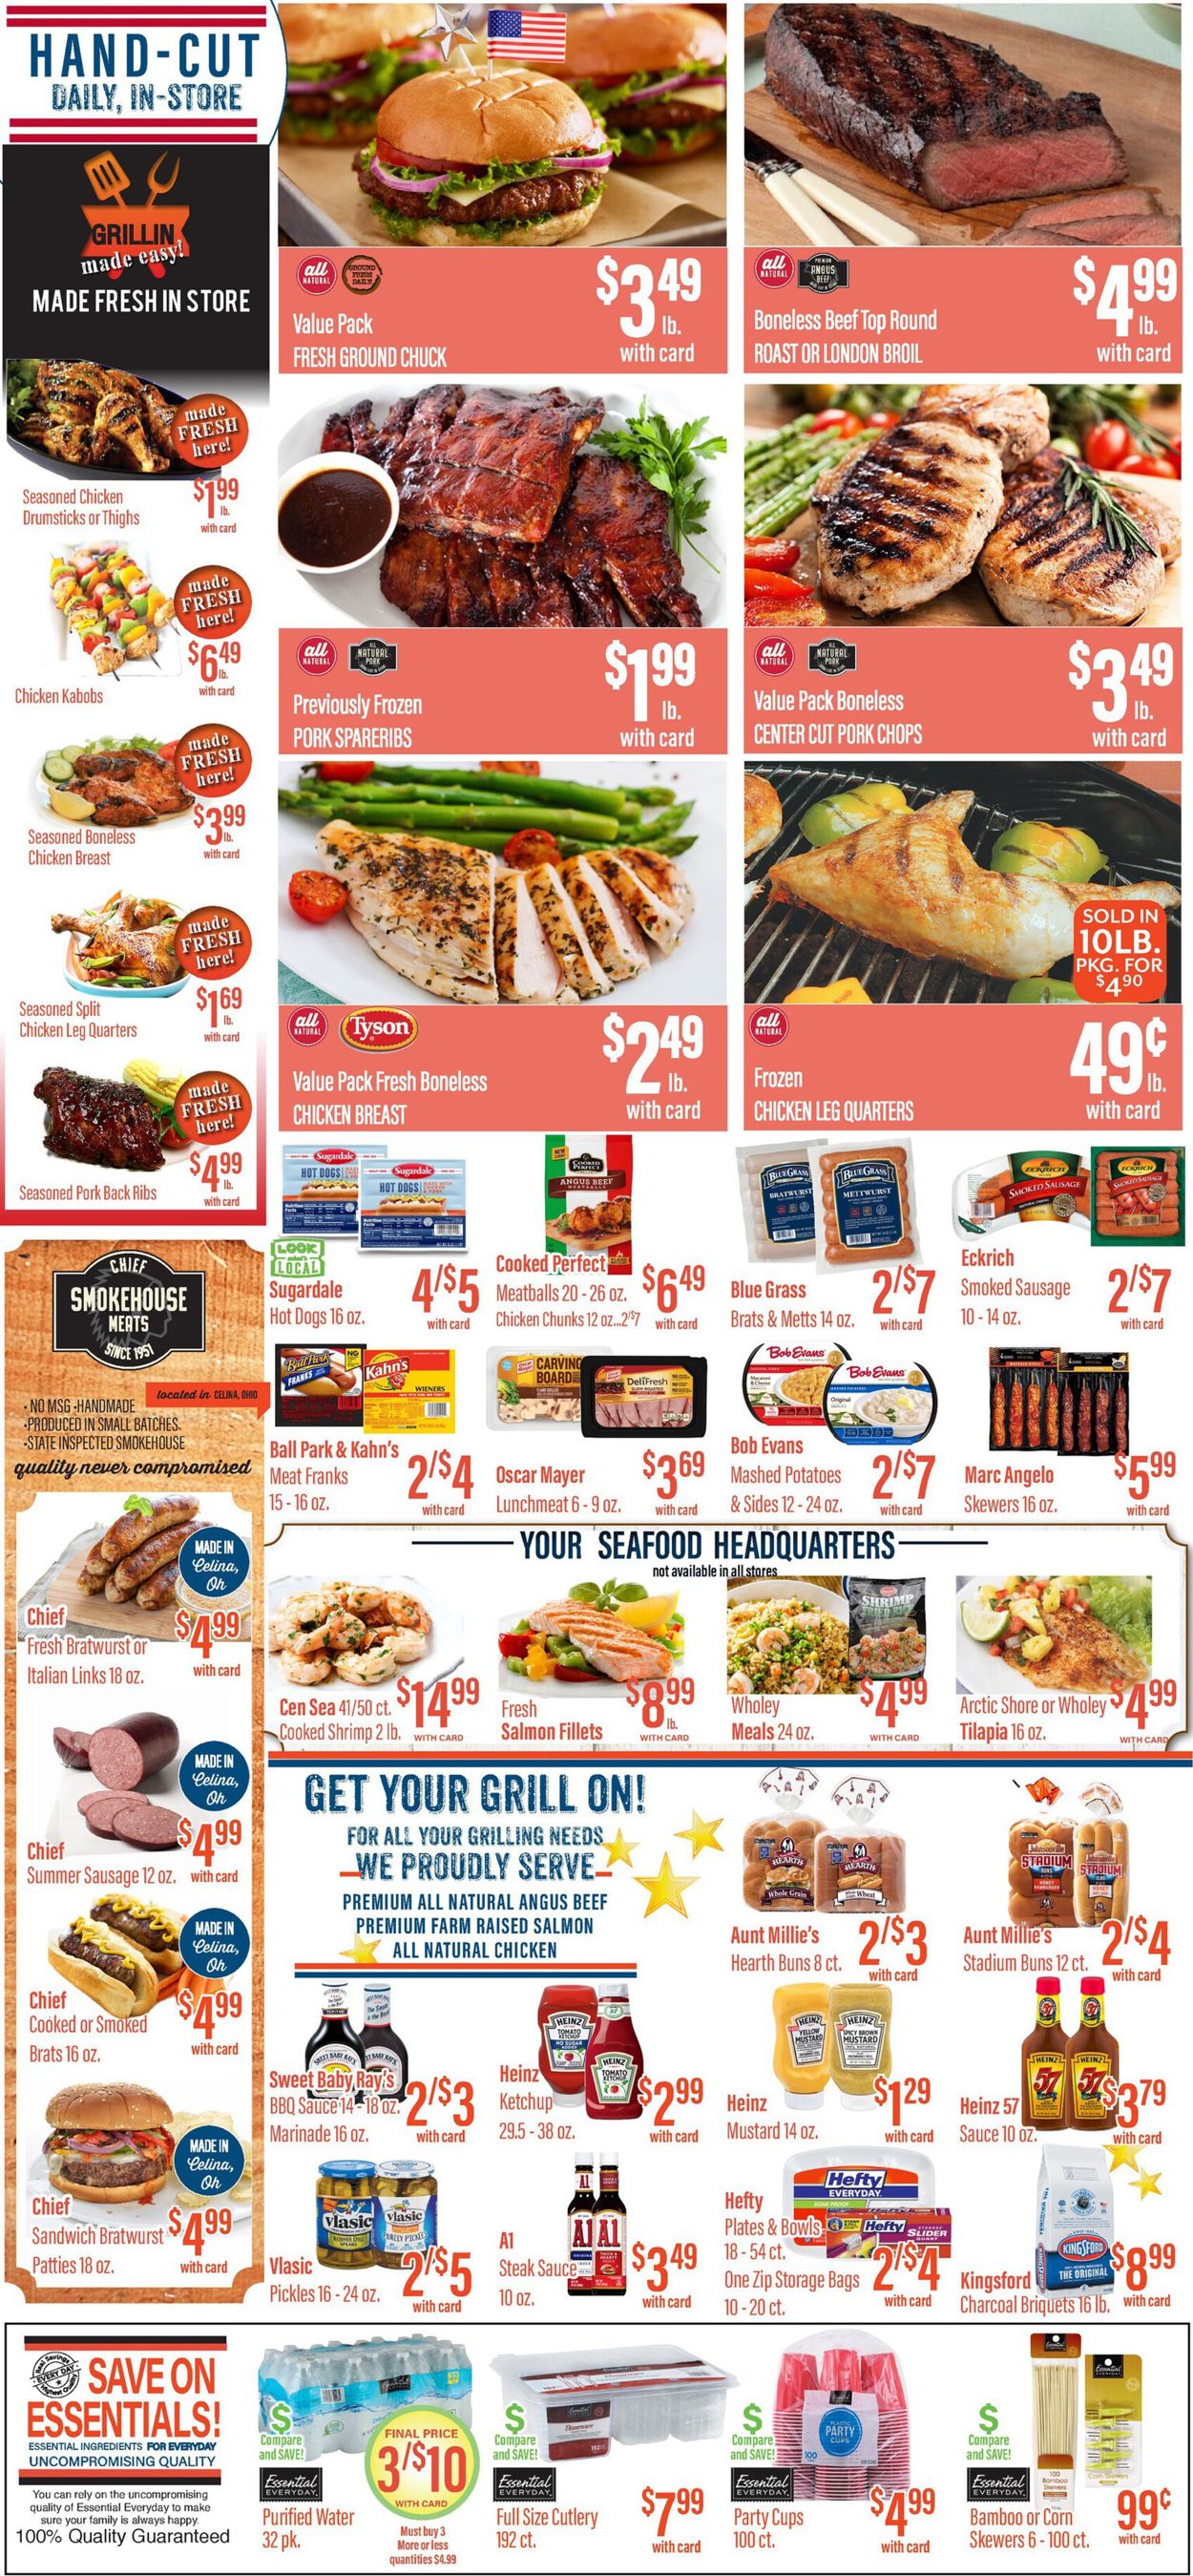 Remke Markets Ad from 09/03/2020